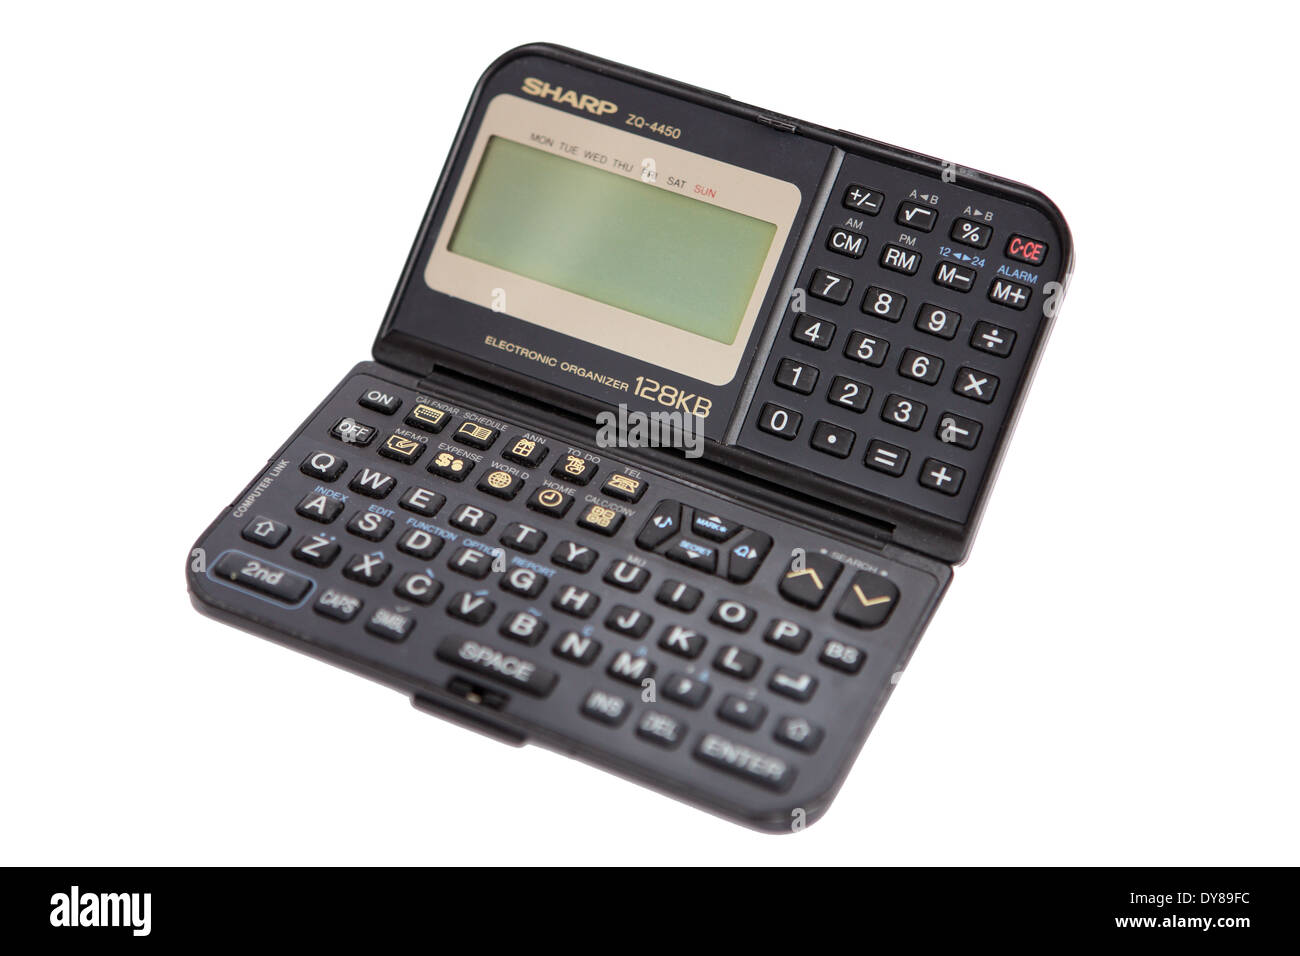 Electronic Personal Organiser a product of the 1990's a calculator sized computer with diary superceded in 2000's by smartphones Stock Photo